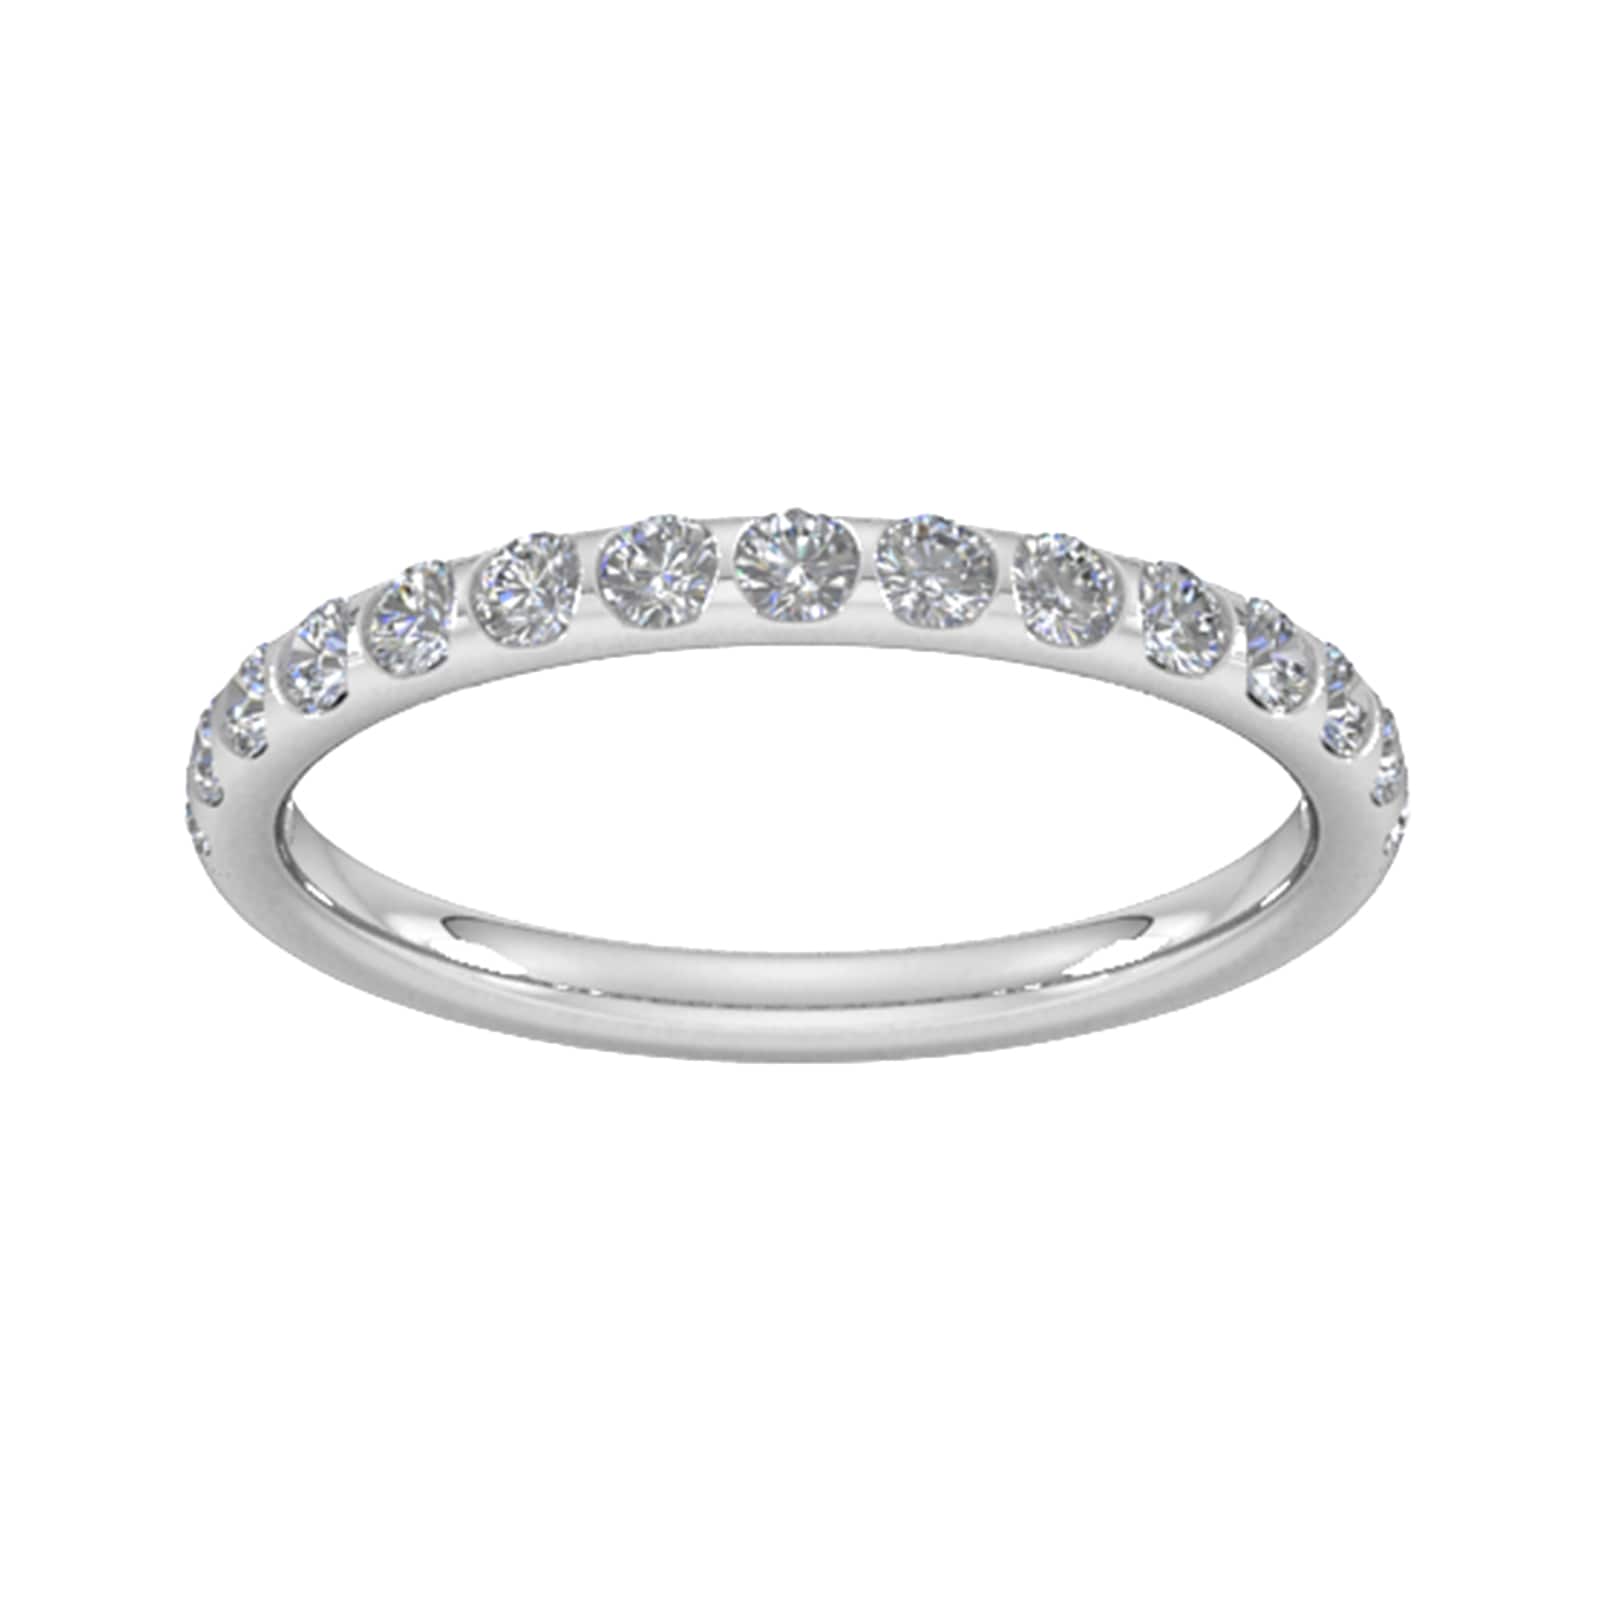 0.53 Carat Total Weight Curved Bar Brilliant Cut Diamond Set Wedding Ring In 18 Carat White Gold - Ring Size V